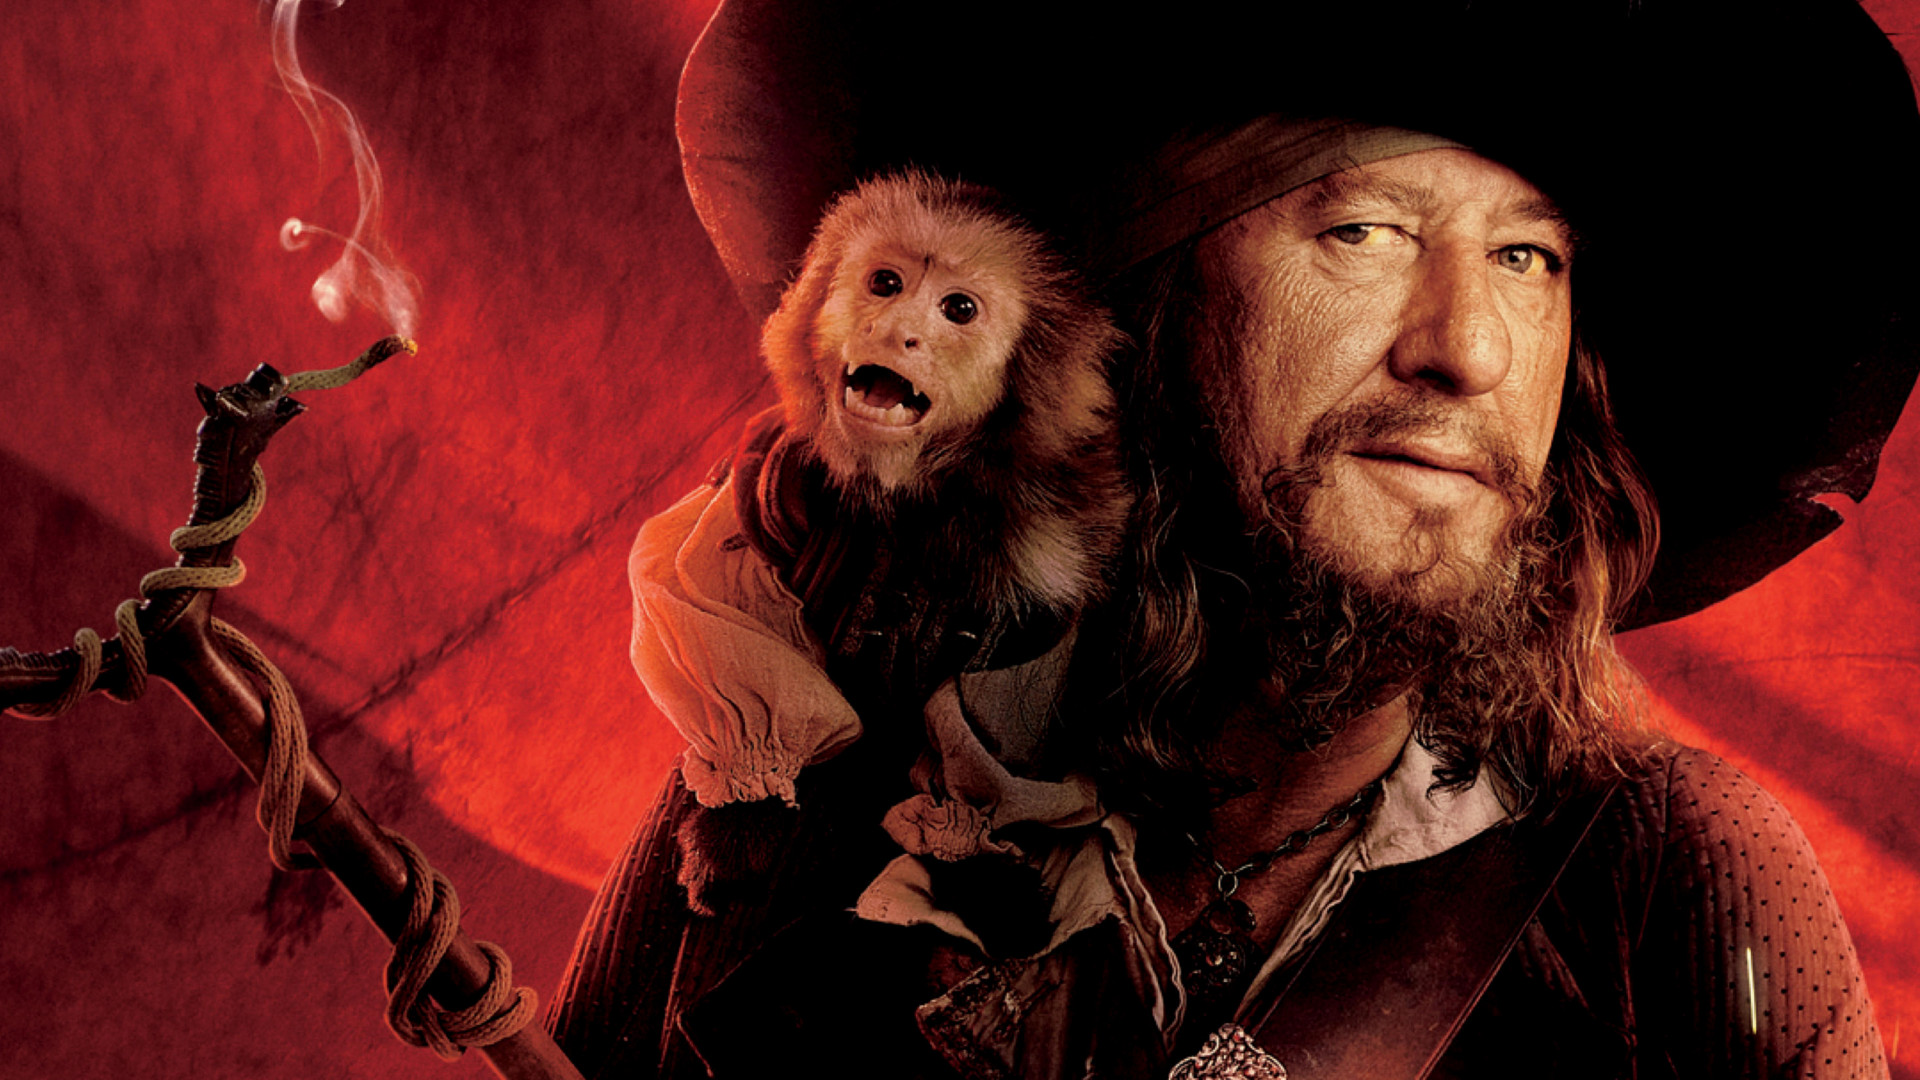 pirates of the caribbean, movie, pirates of the caribbean: at world's end, geoffrey rush, hector barbossa